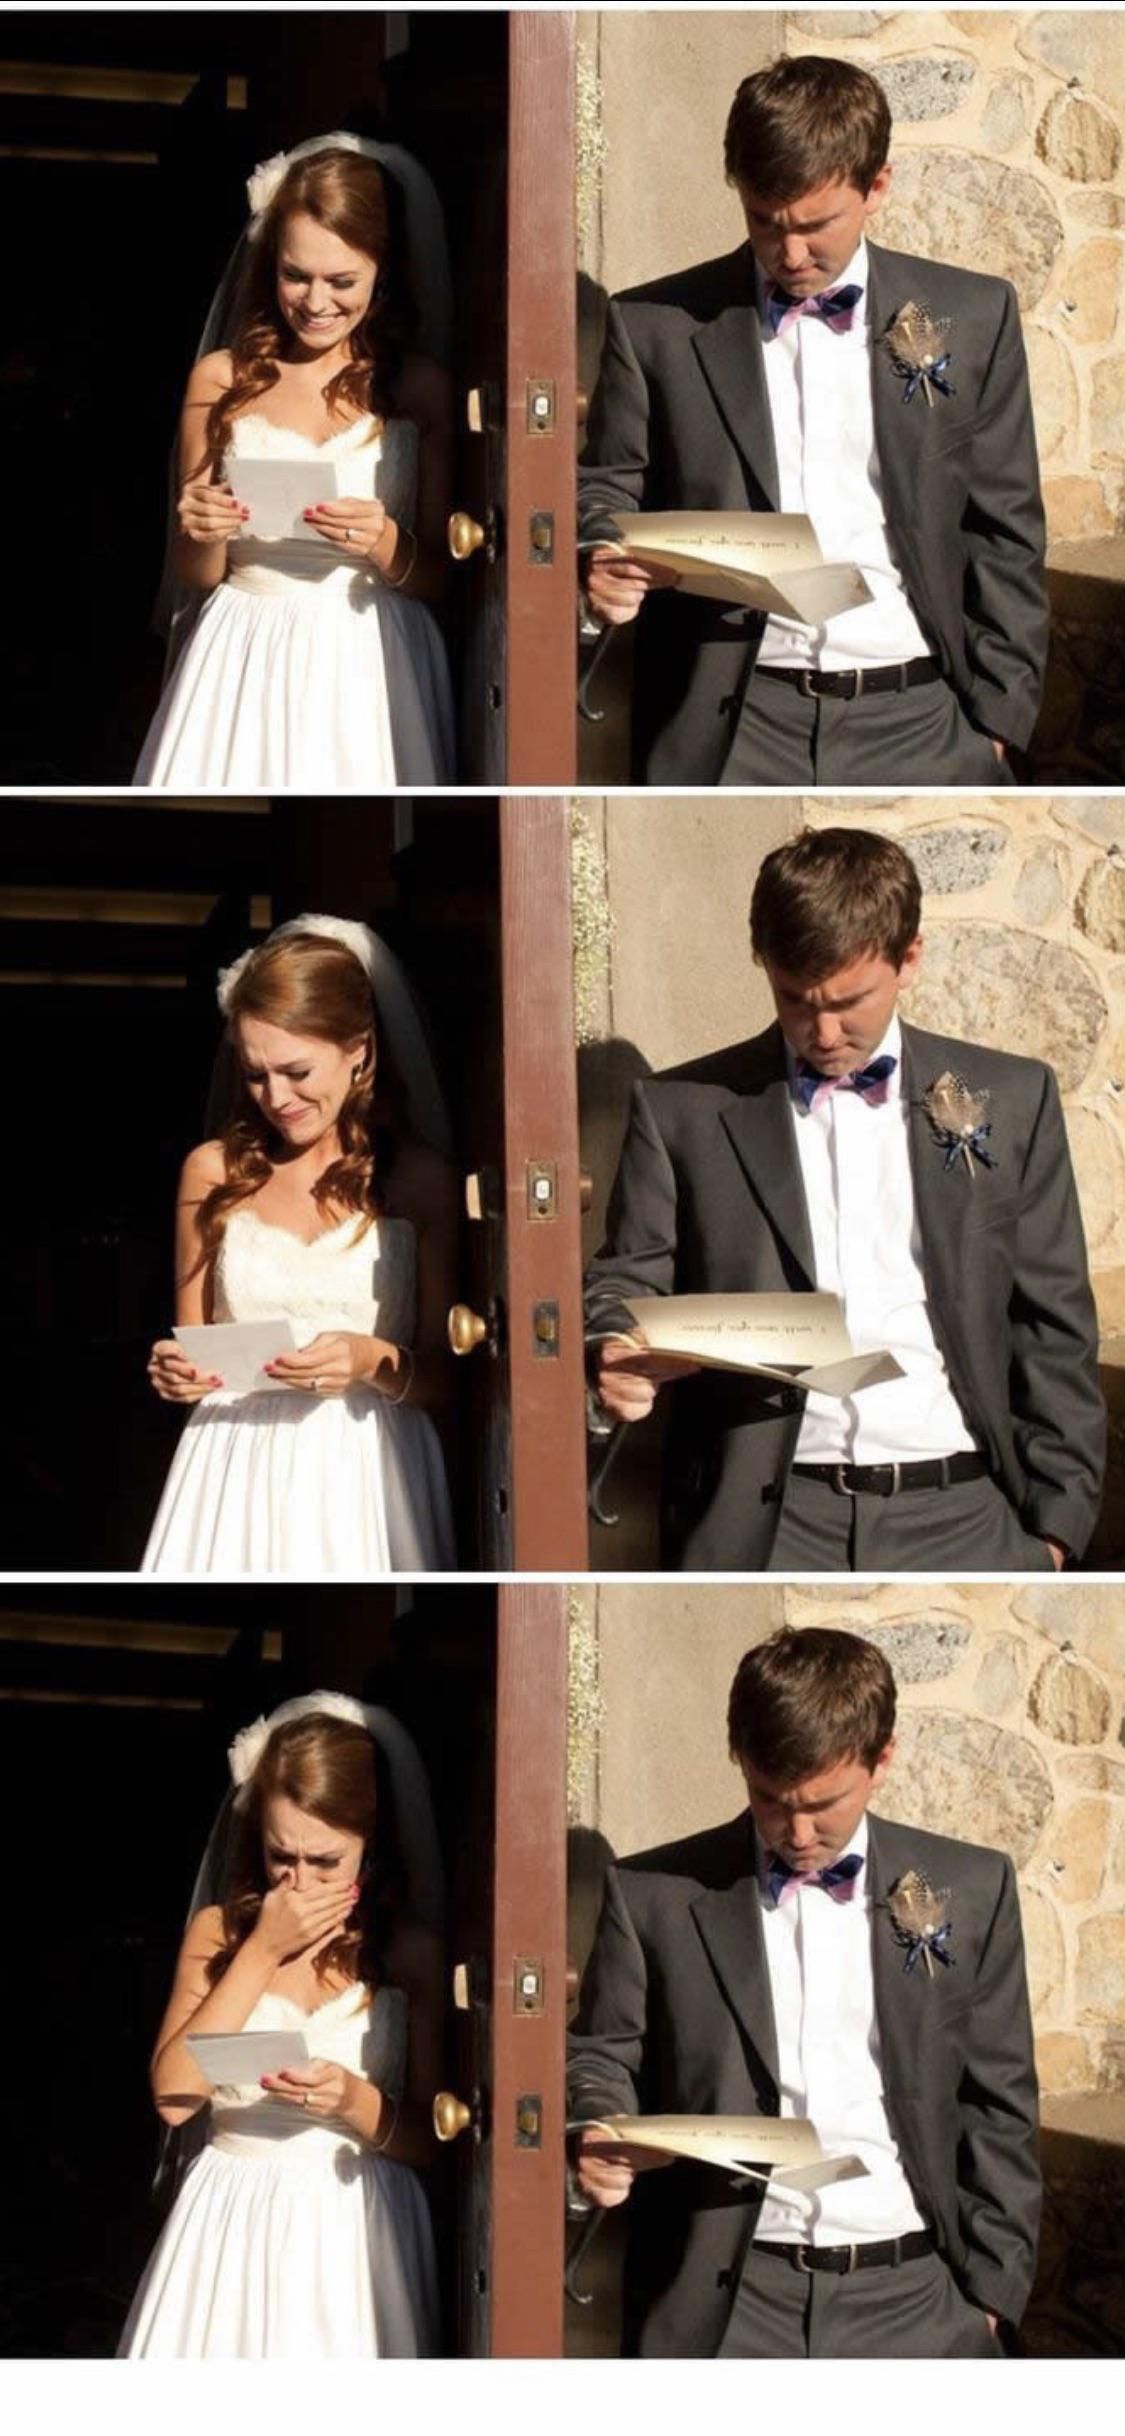 Difference btwn a man and woman reading a sweet letter